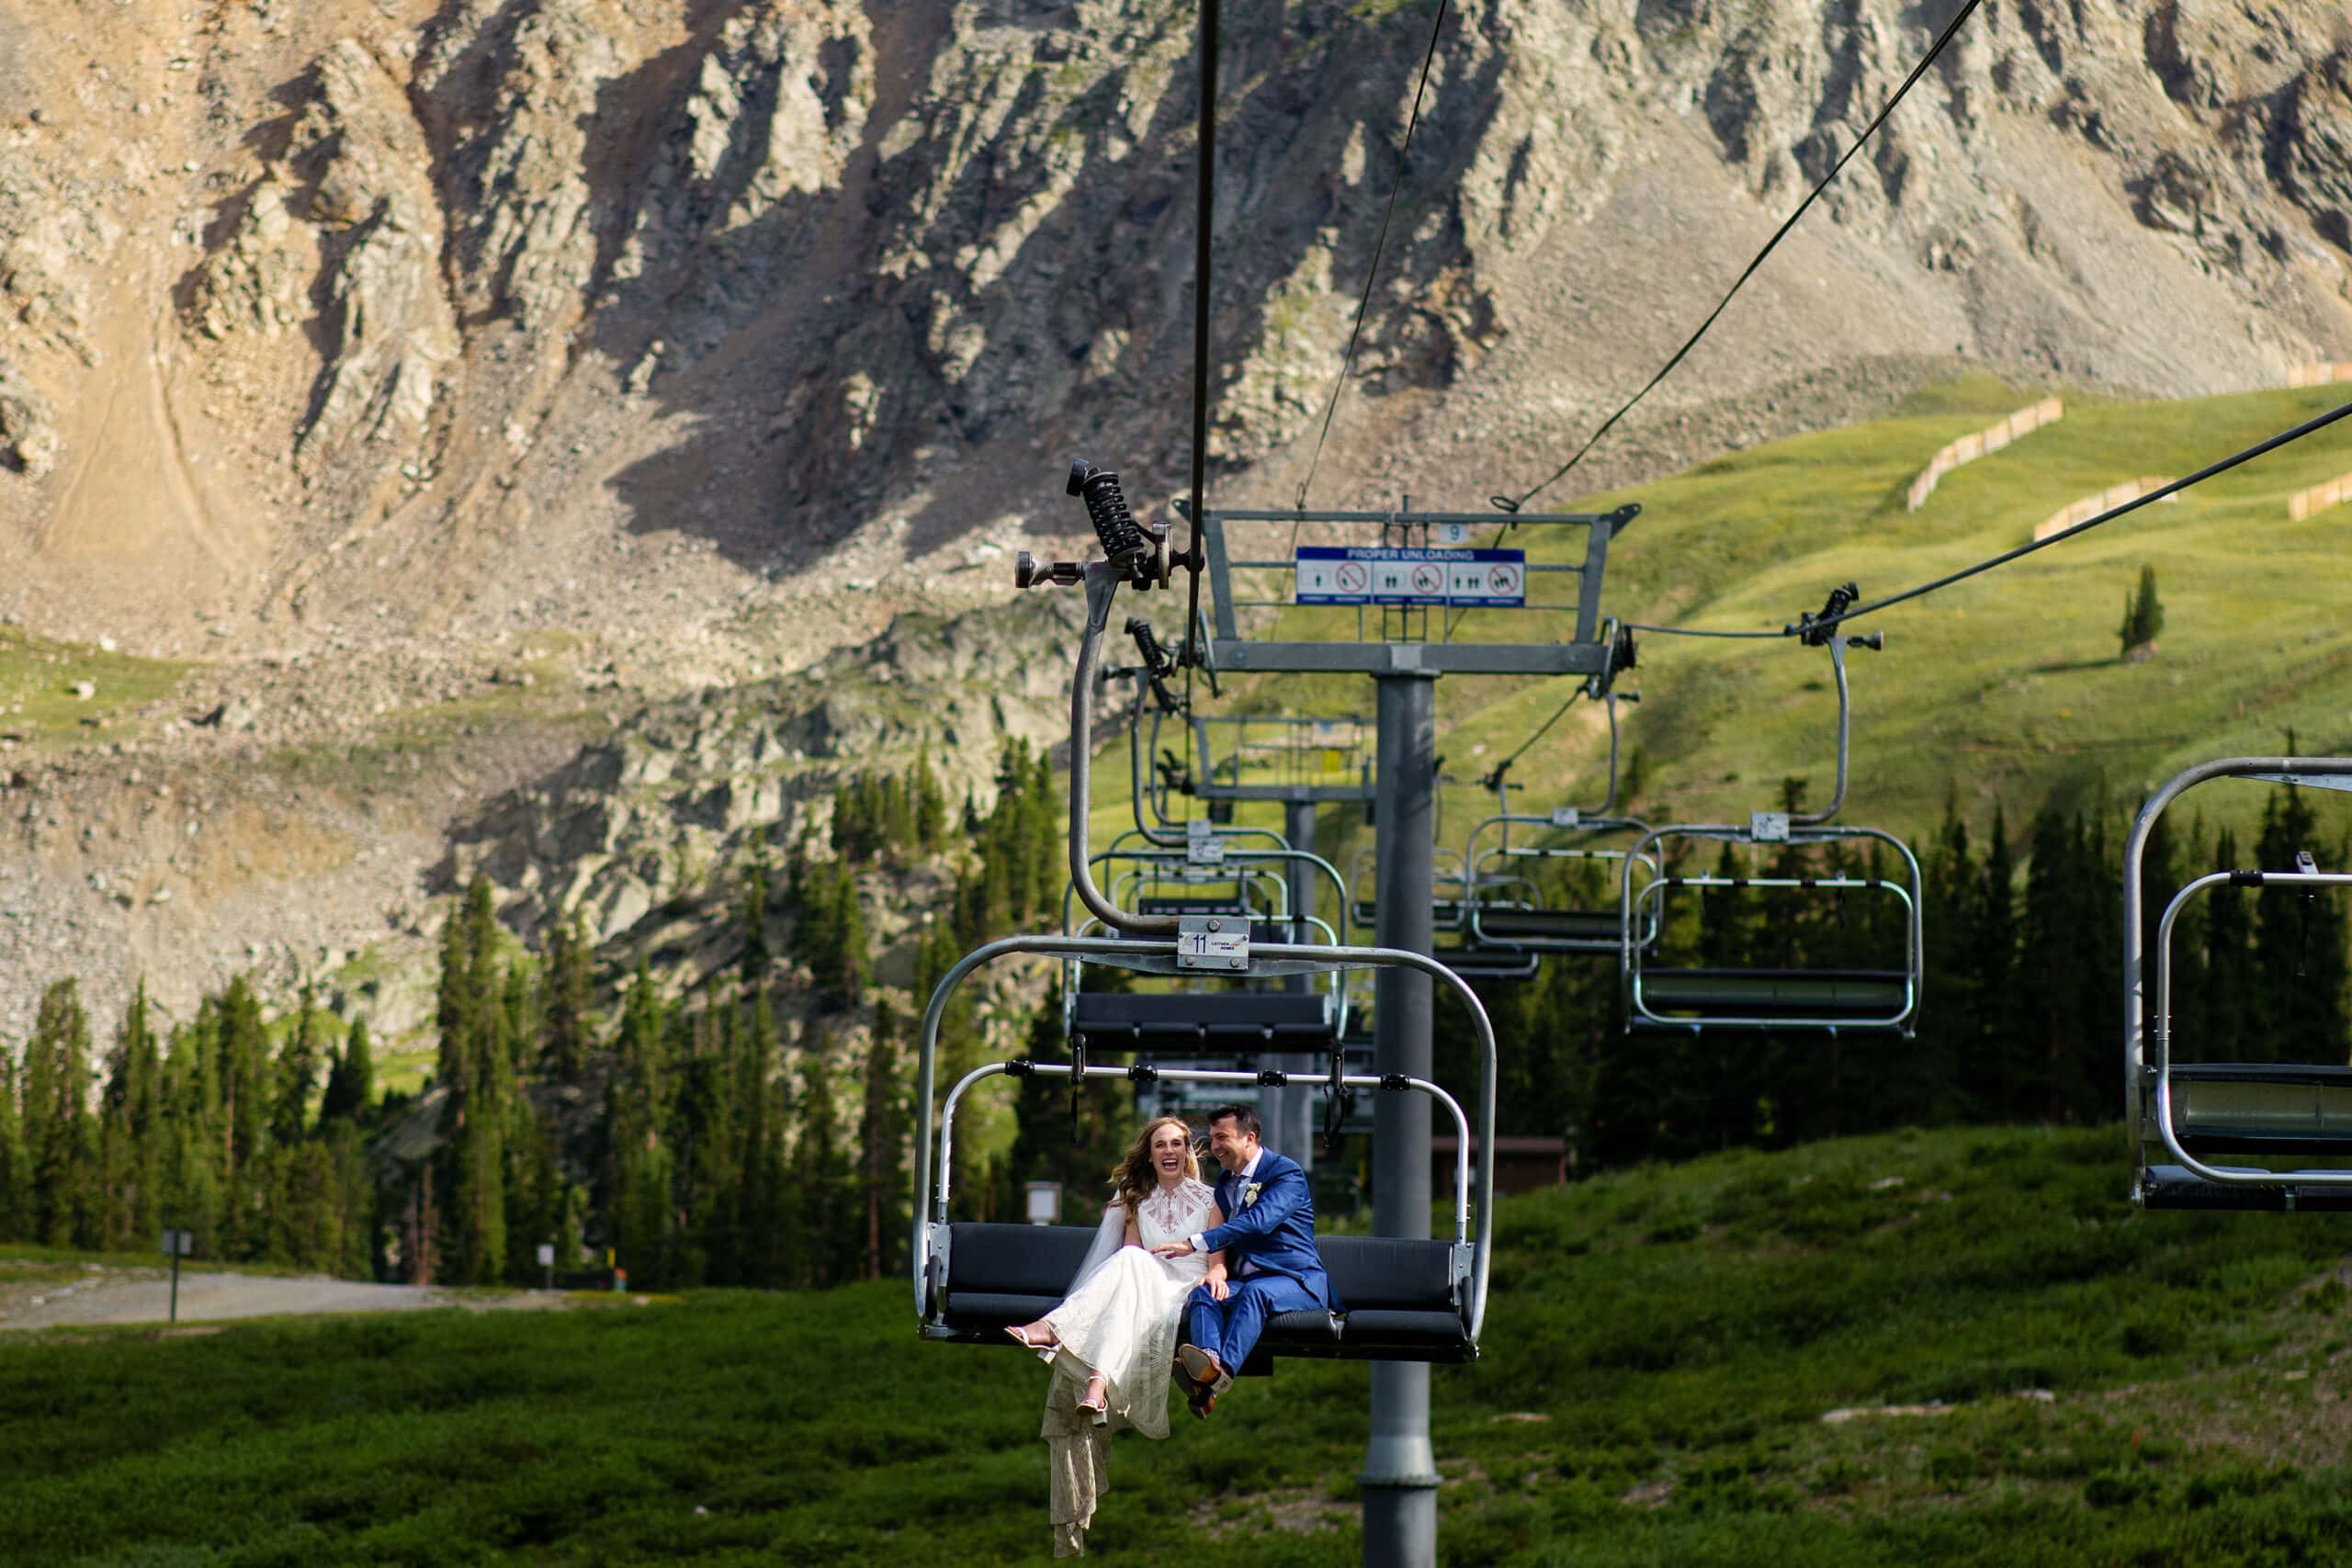 The bride and groom laugh as they ride the chairlift